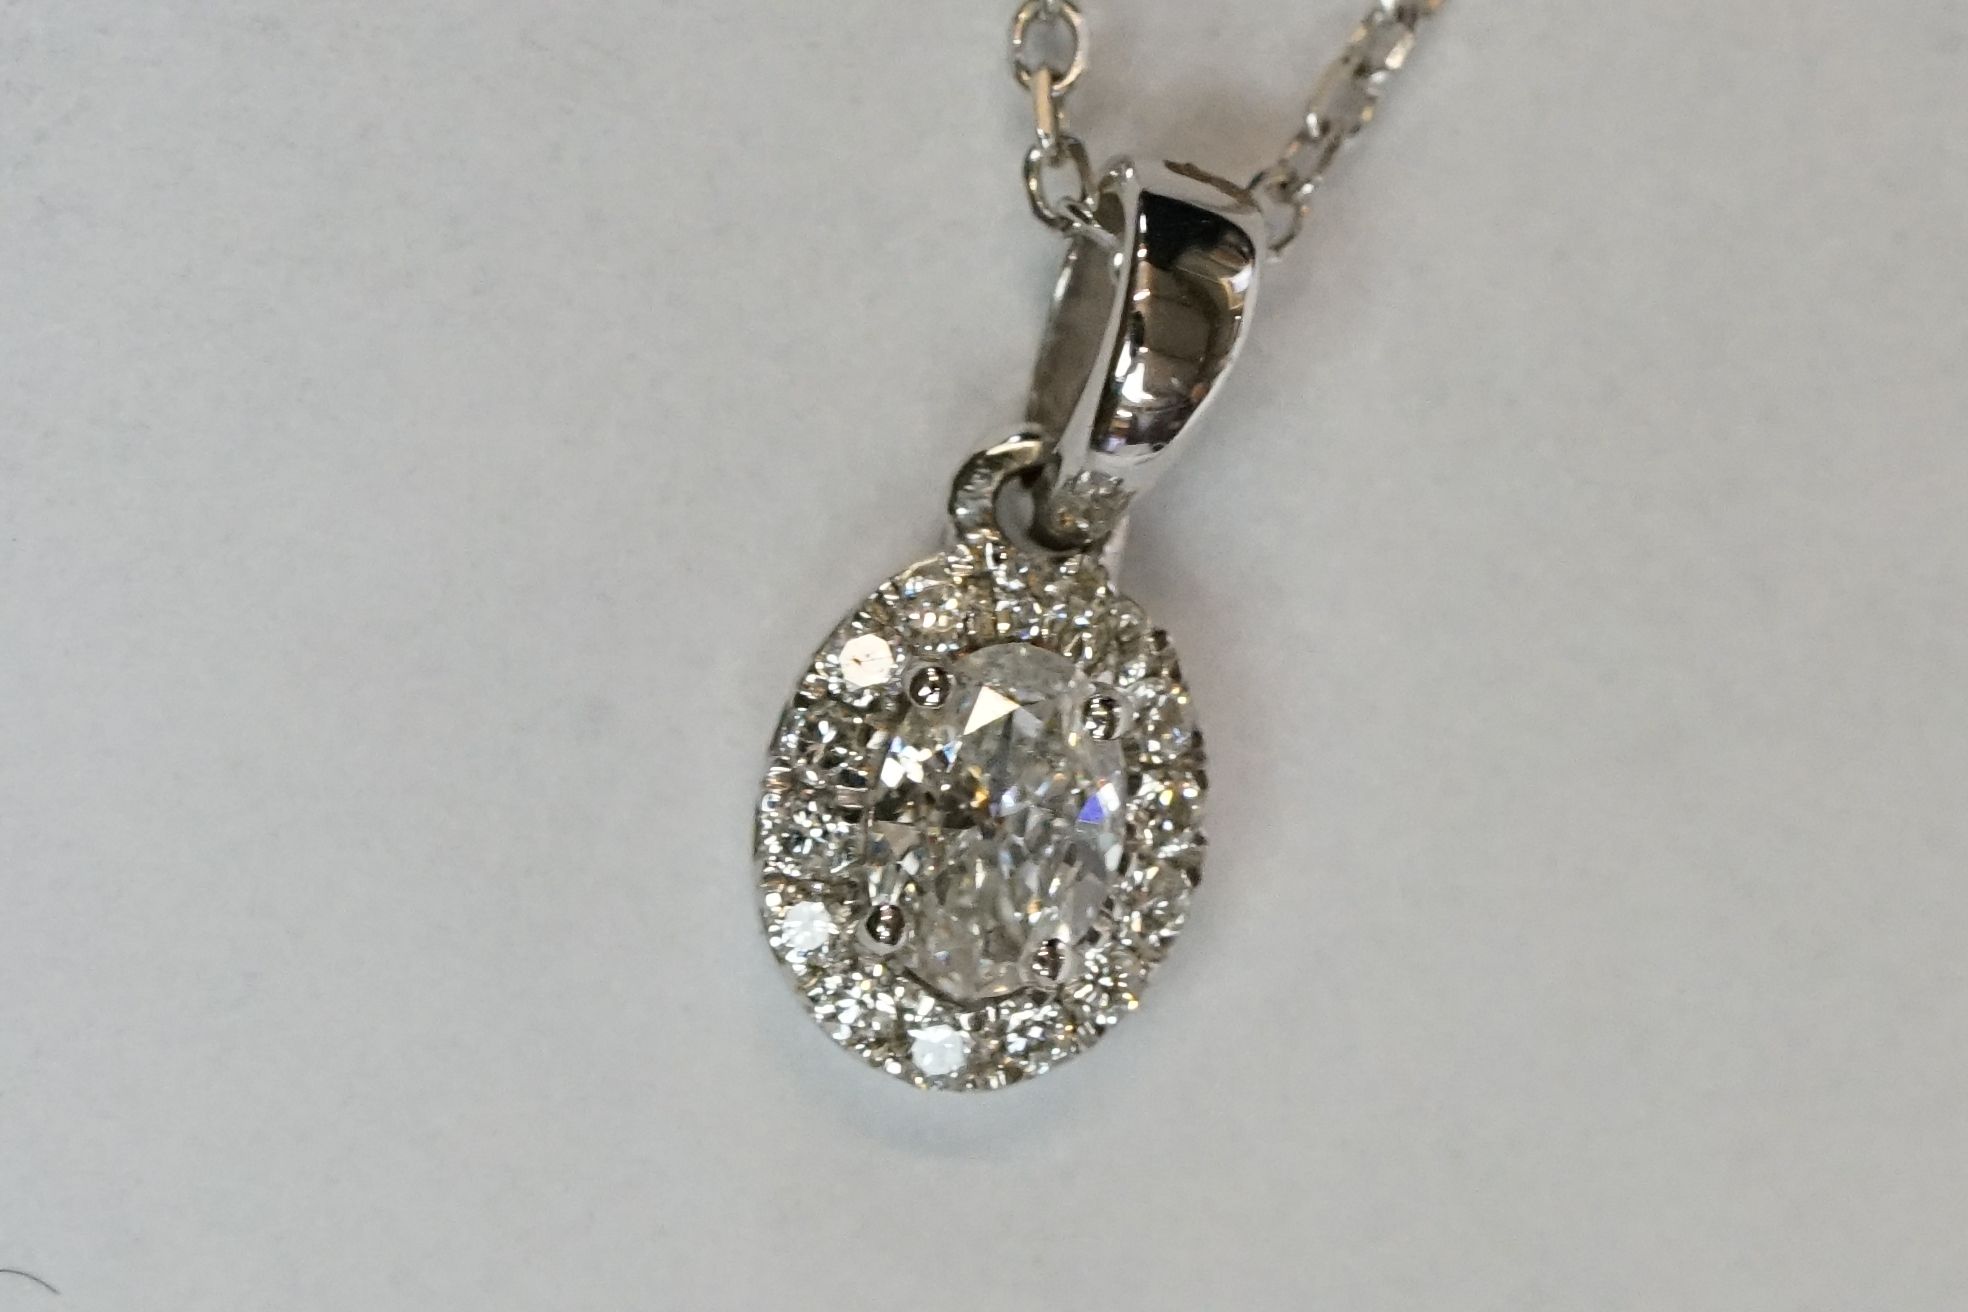 18ct White Gold Diamond Pendant of 25 points approx. total on gold chain - Image 11 of 11